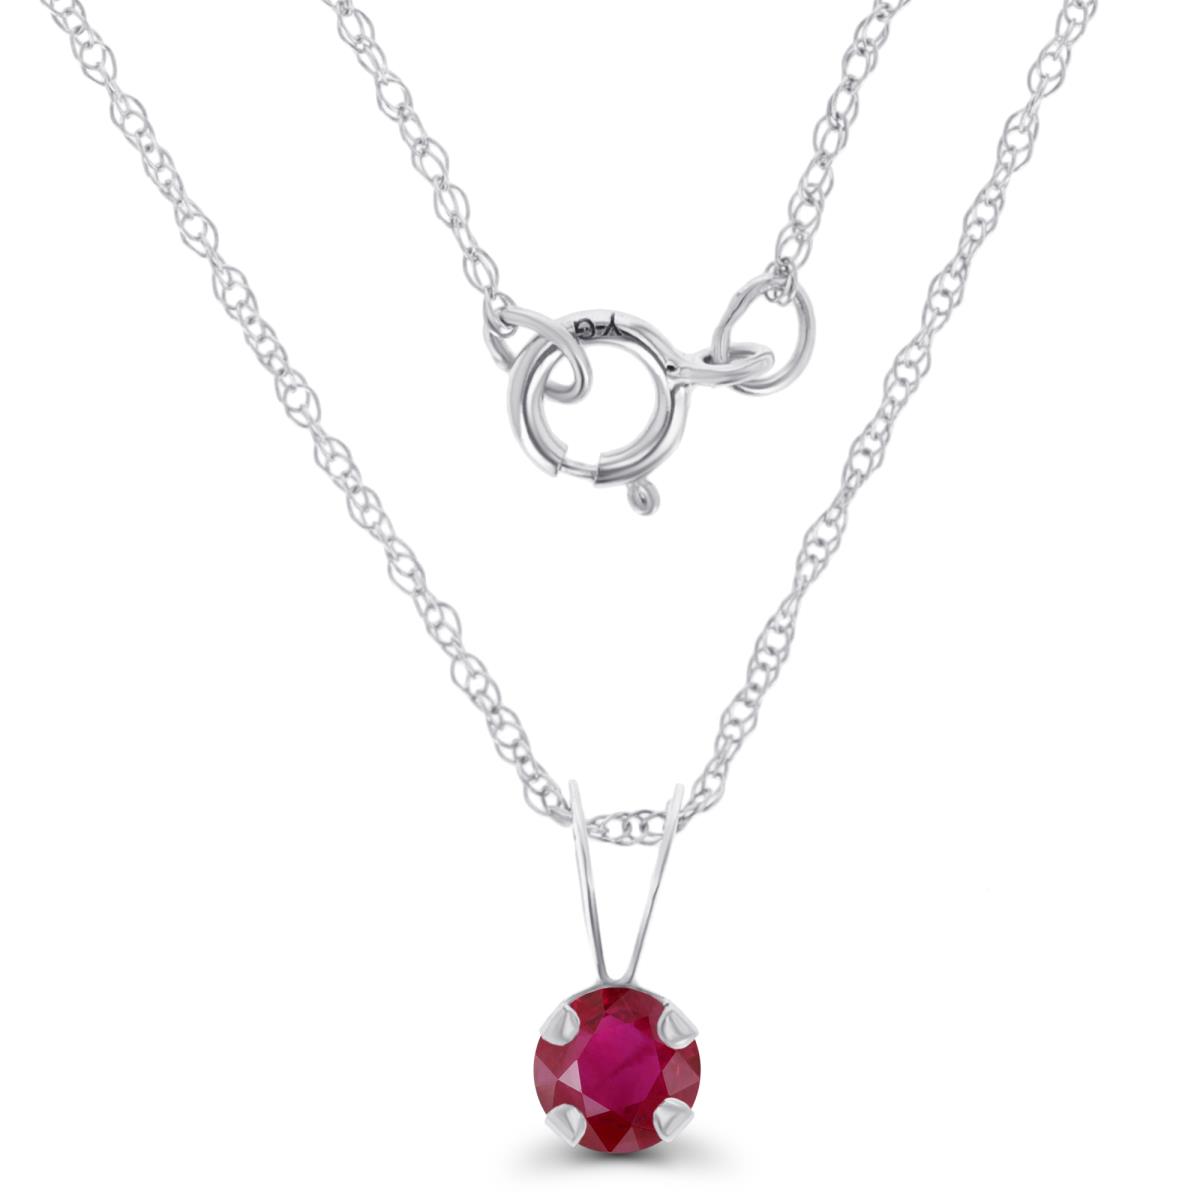 14K White Gold 4mm Round Glass Filled Ruby 18" Rope Chain Necklace